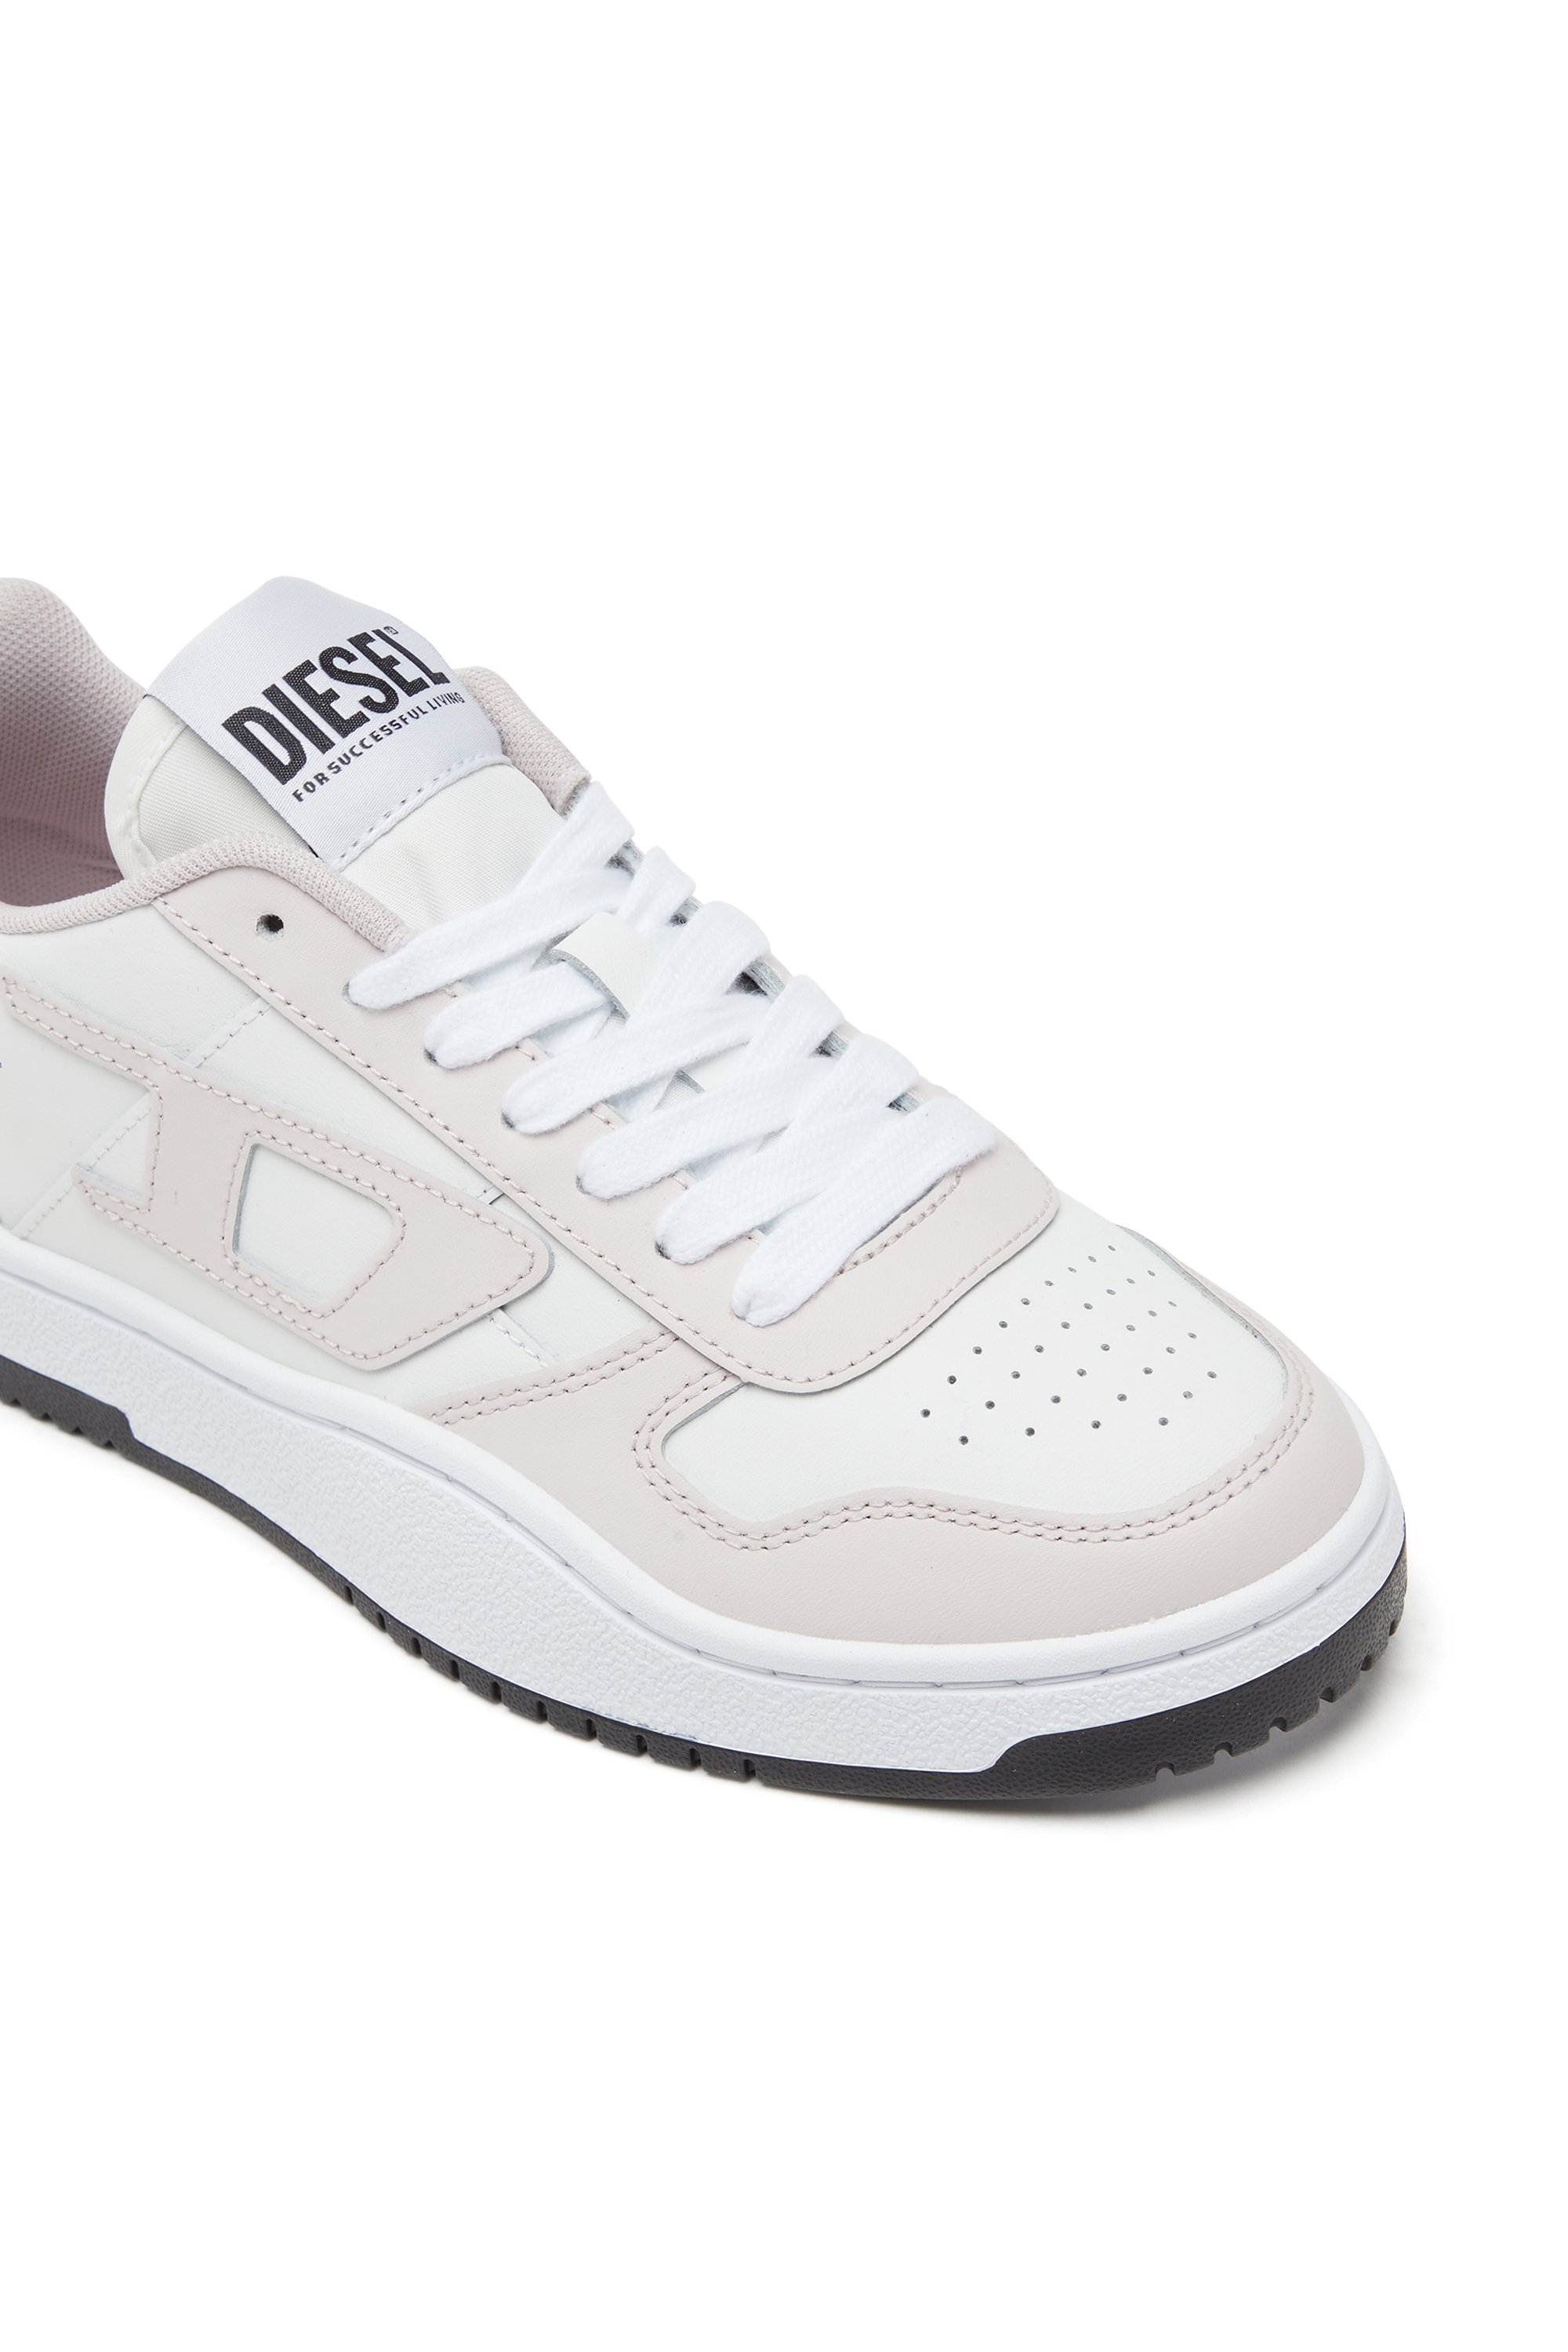 Diesel - S-UKIYO V2 LOW W, Woman S-Ukiyo Low-Low-top sneakers in leather and nylon in Multicolor - Image 6